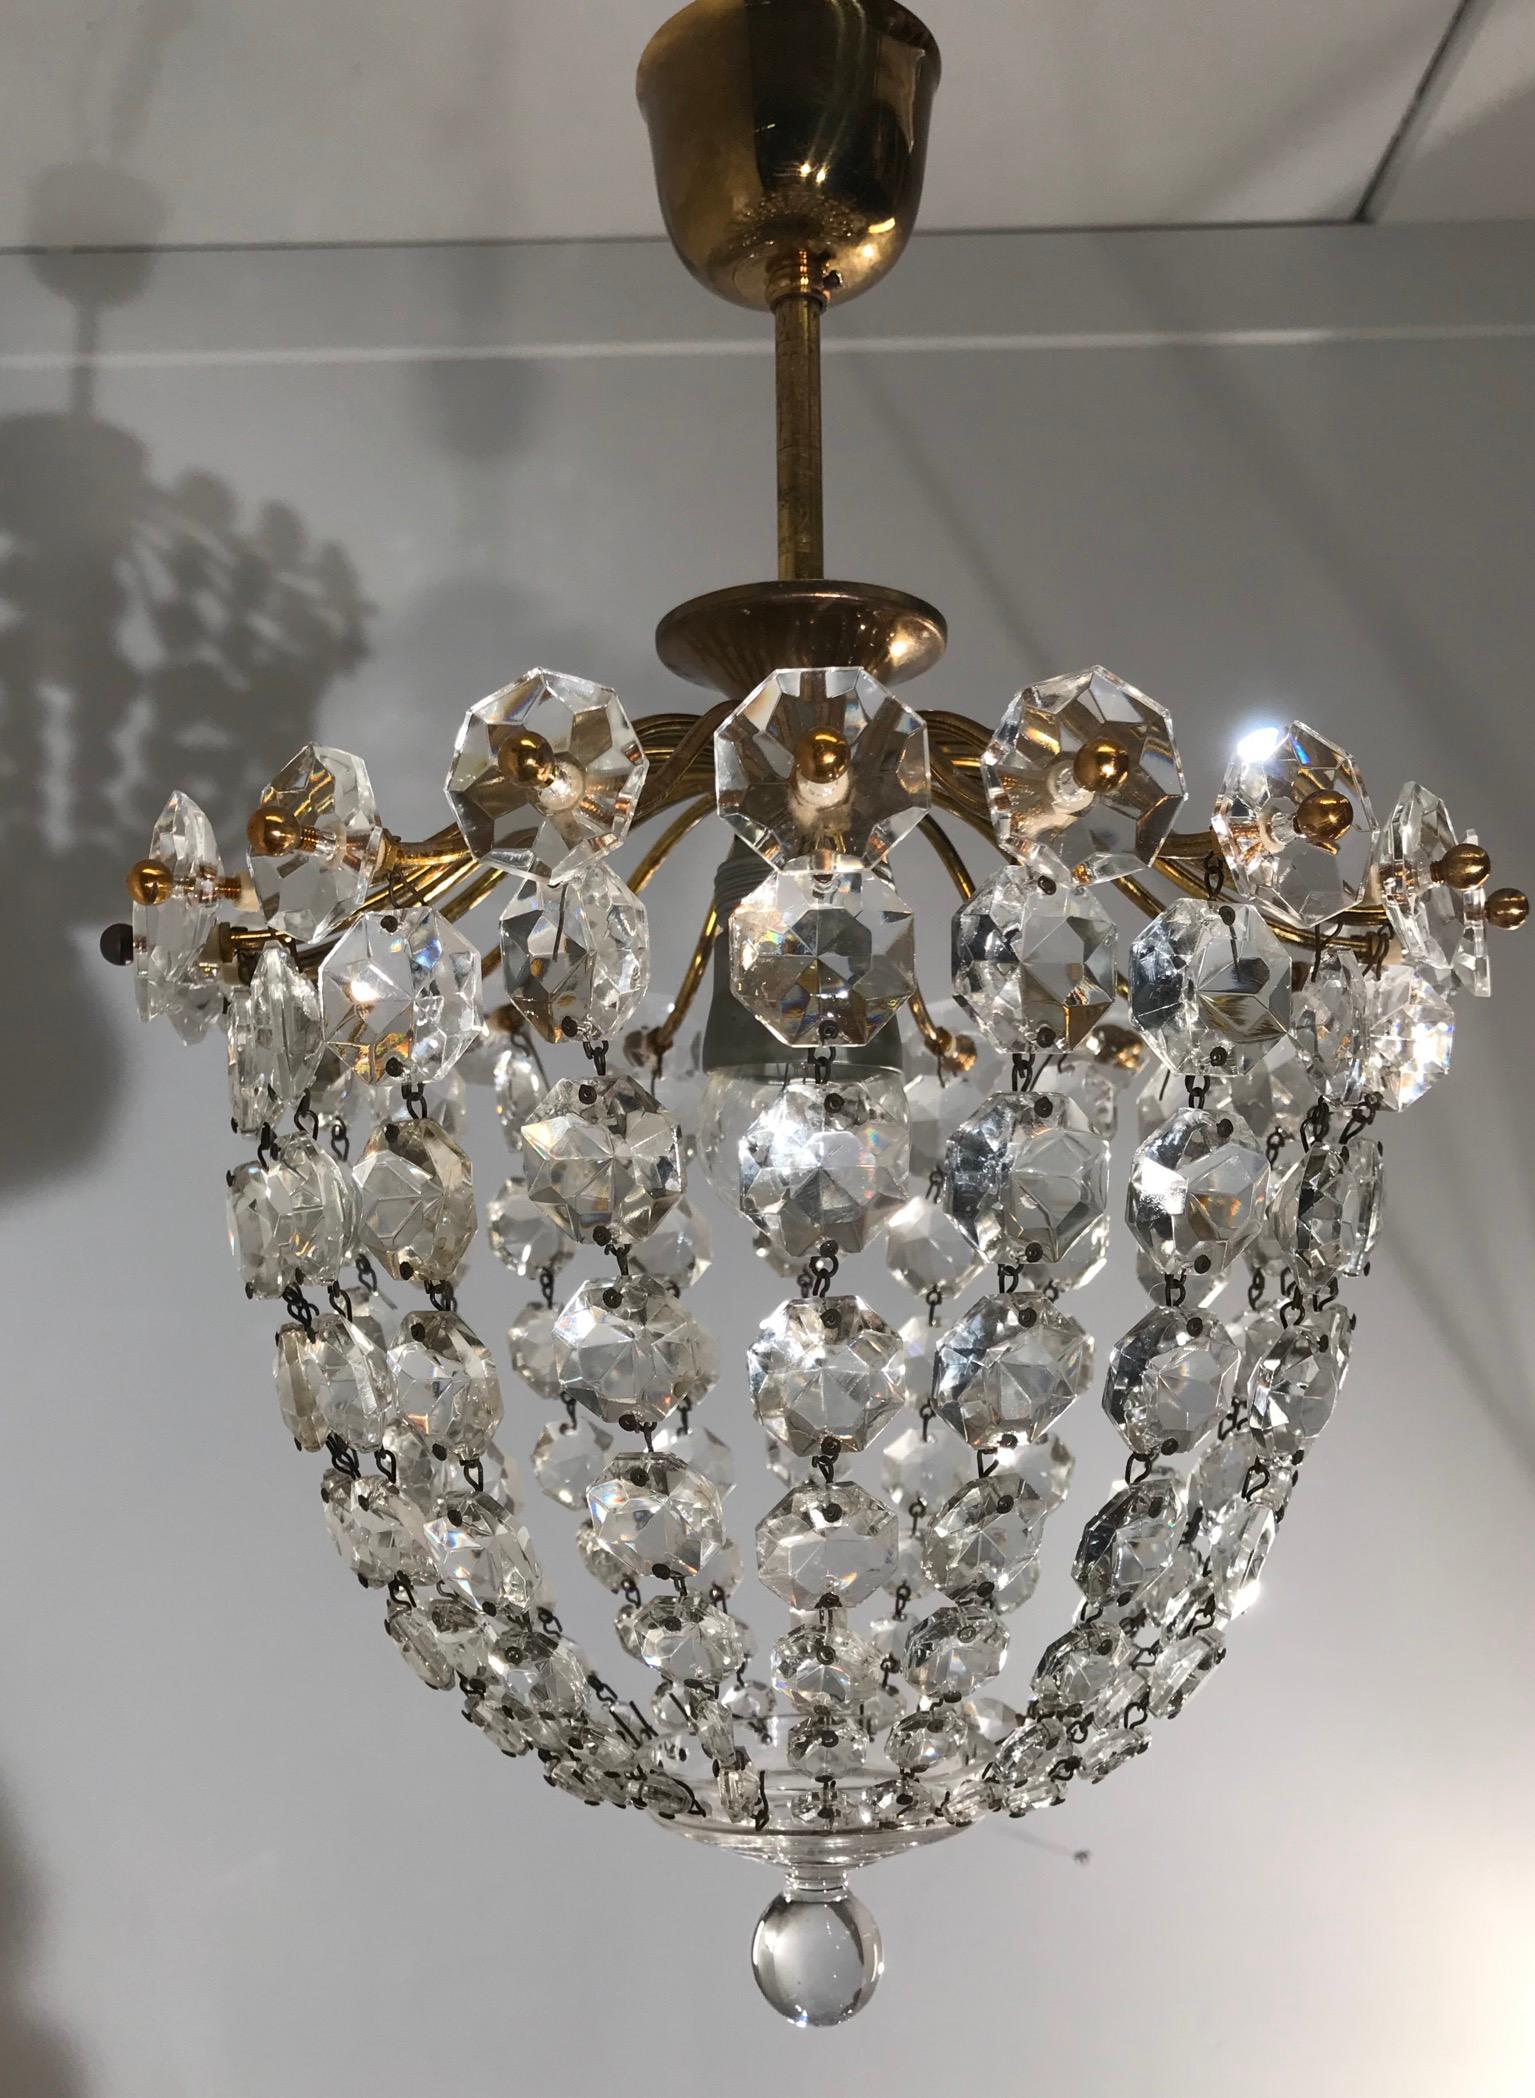 Hand-Crafted Stylish Little Midcentury Brass and Crystal Glass Murano Pendant Light Fixture